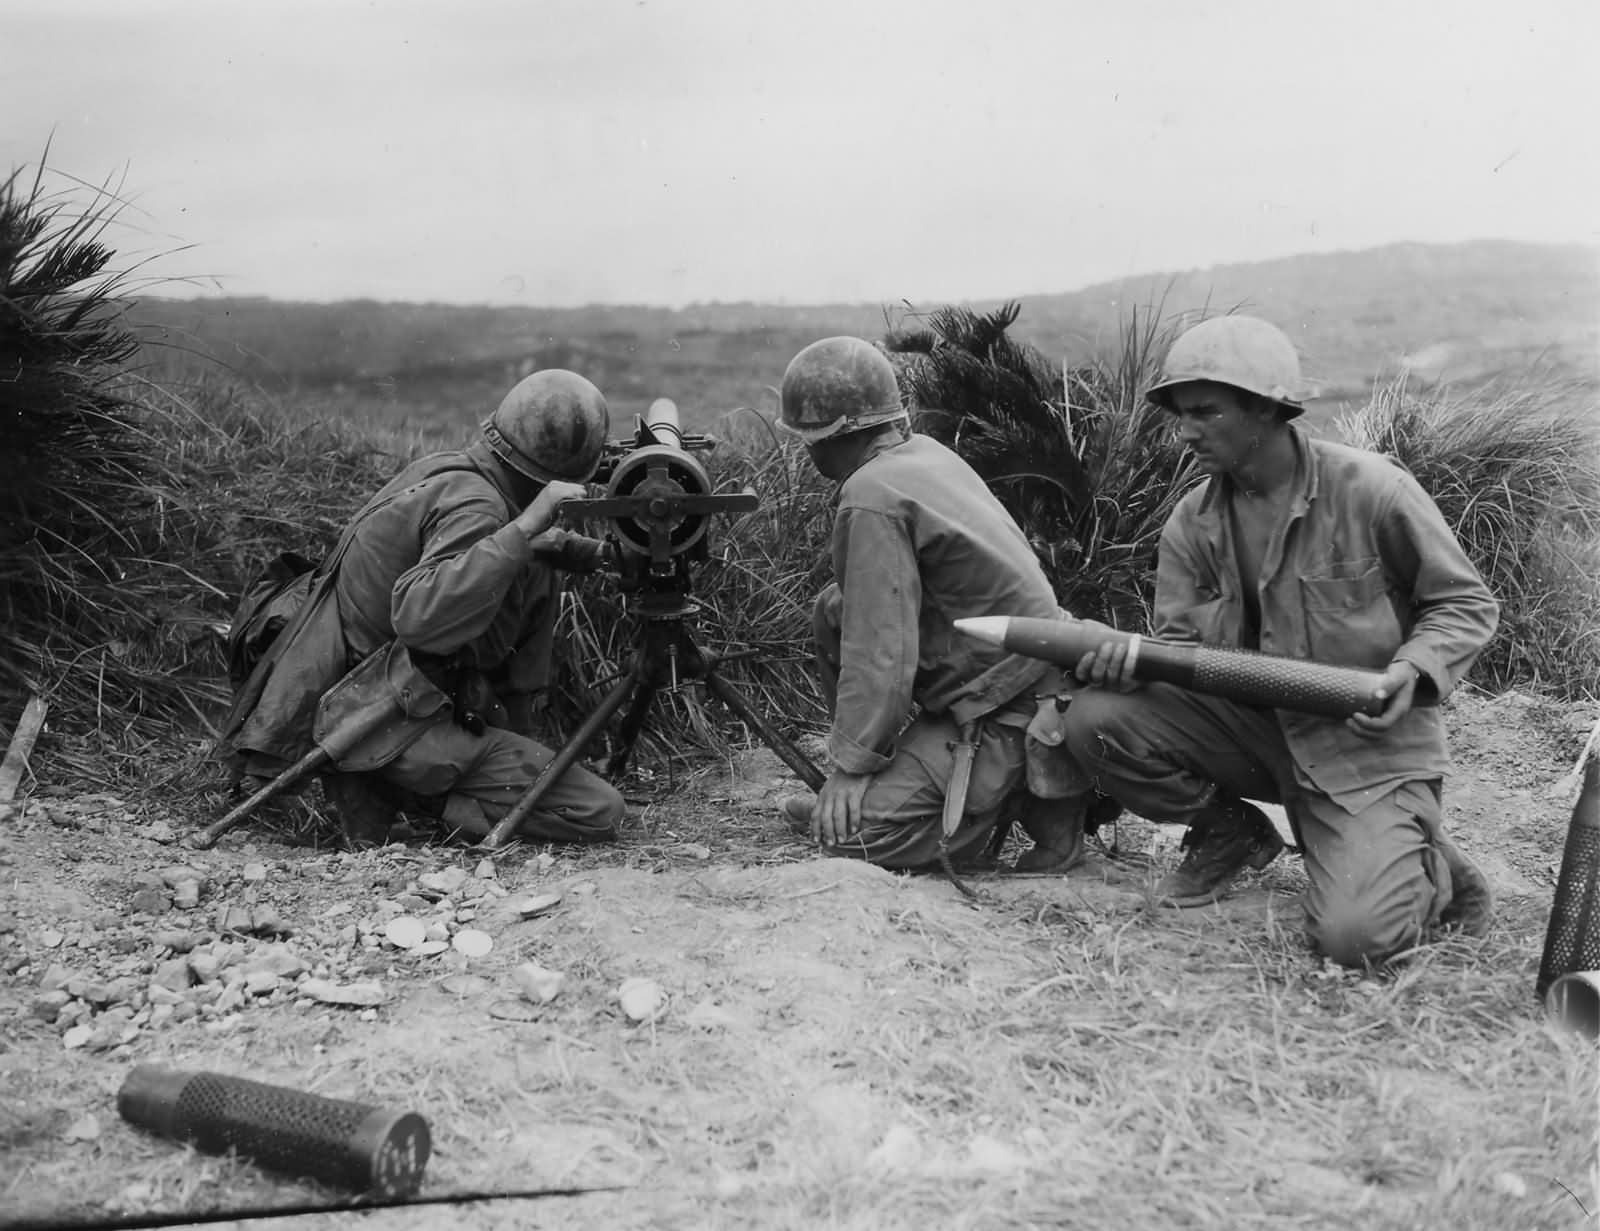 75mm Recoiless Rifle in Action Okinawa 1945